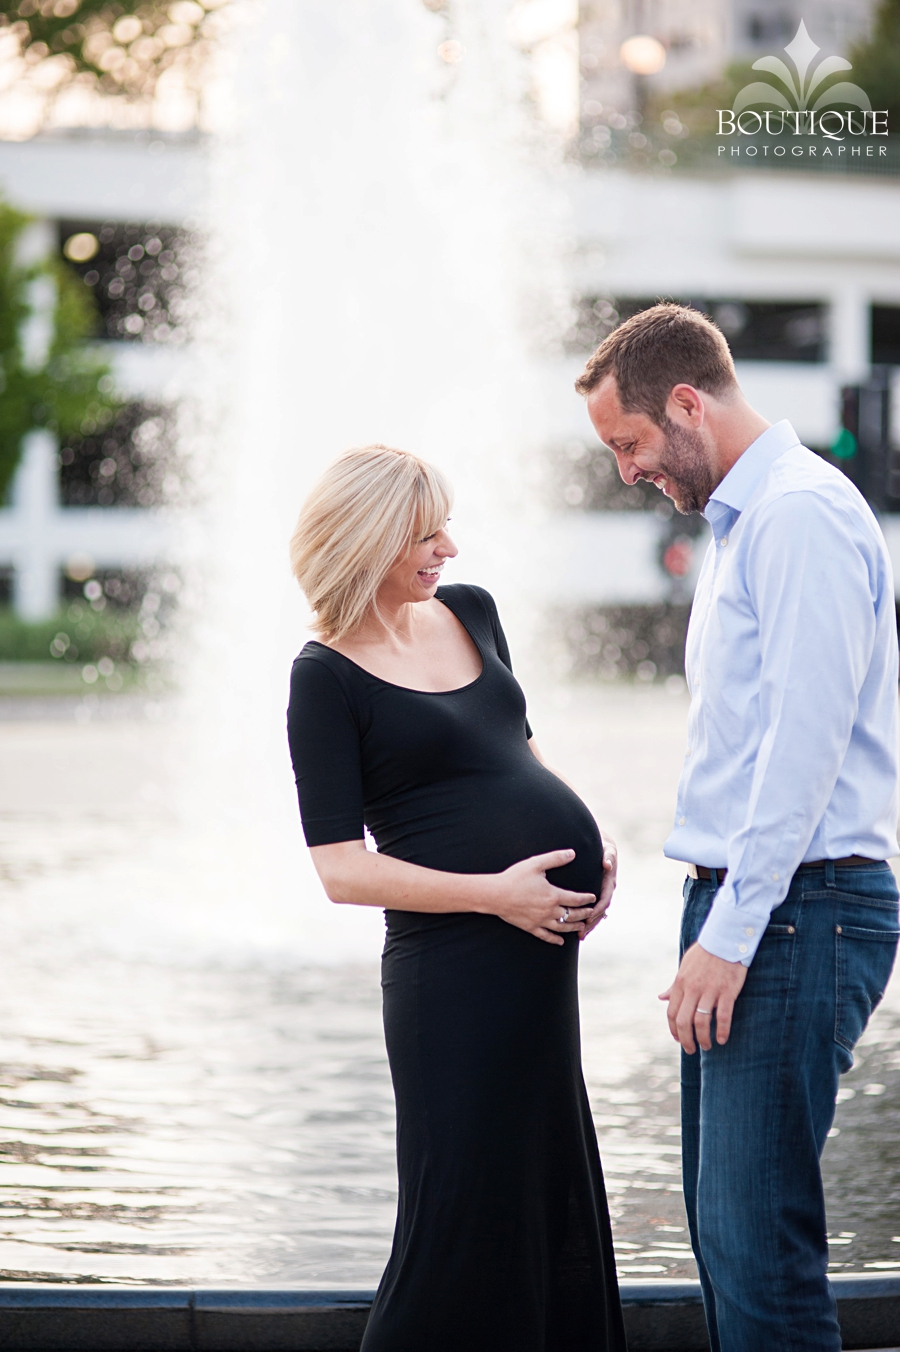 Life Style Maternity Session at the Milwaukee Art Museum